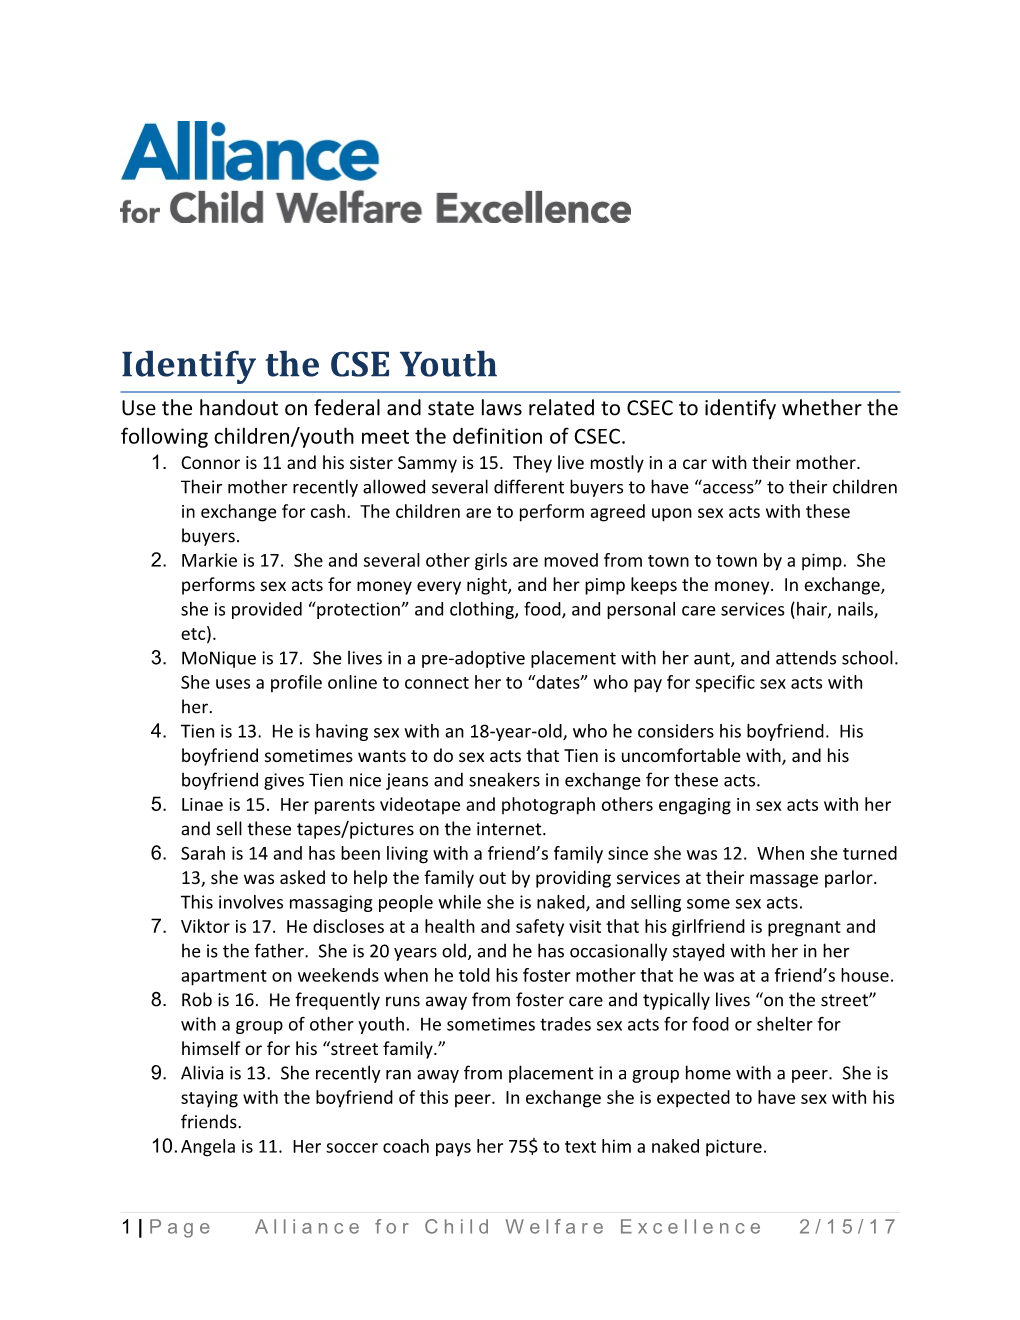 Identify the CSE Youth